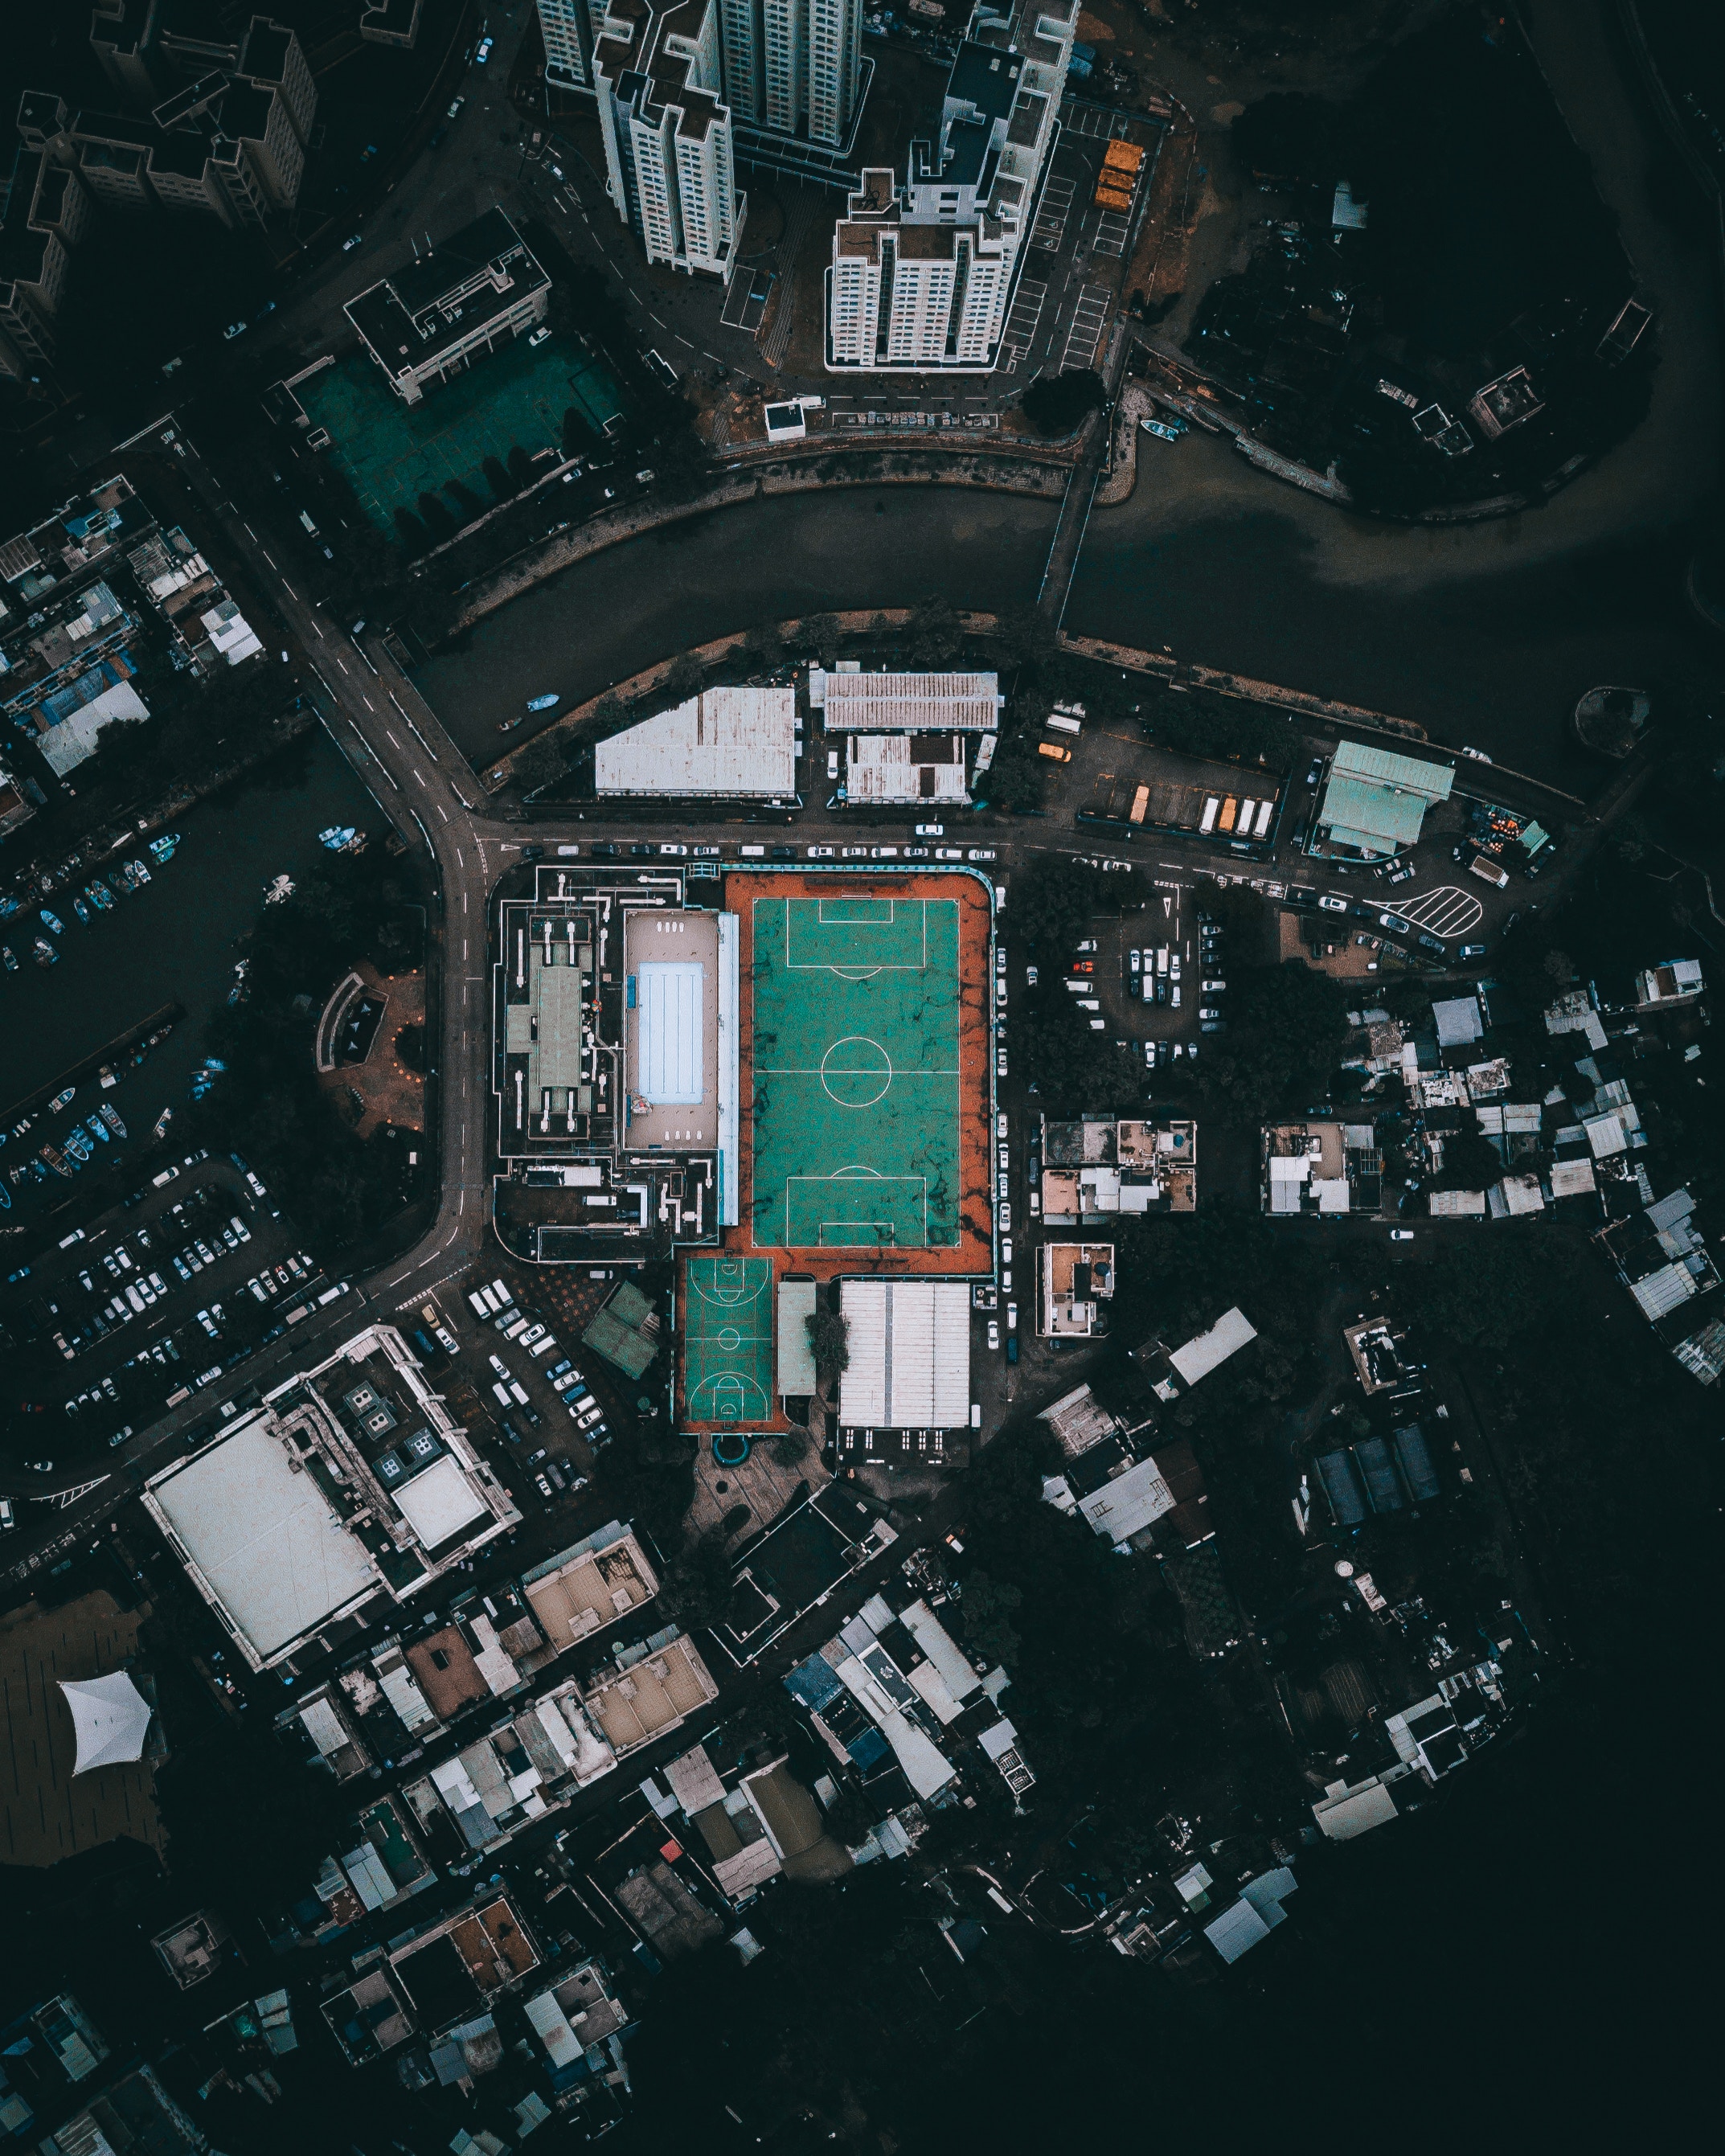 cities, architecture, city, view from above, panorama, roof, parking, roofs, district, stadium